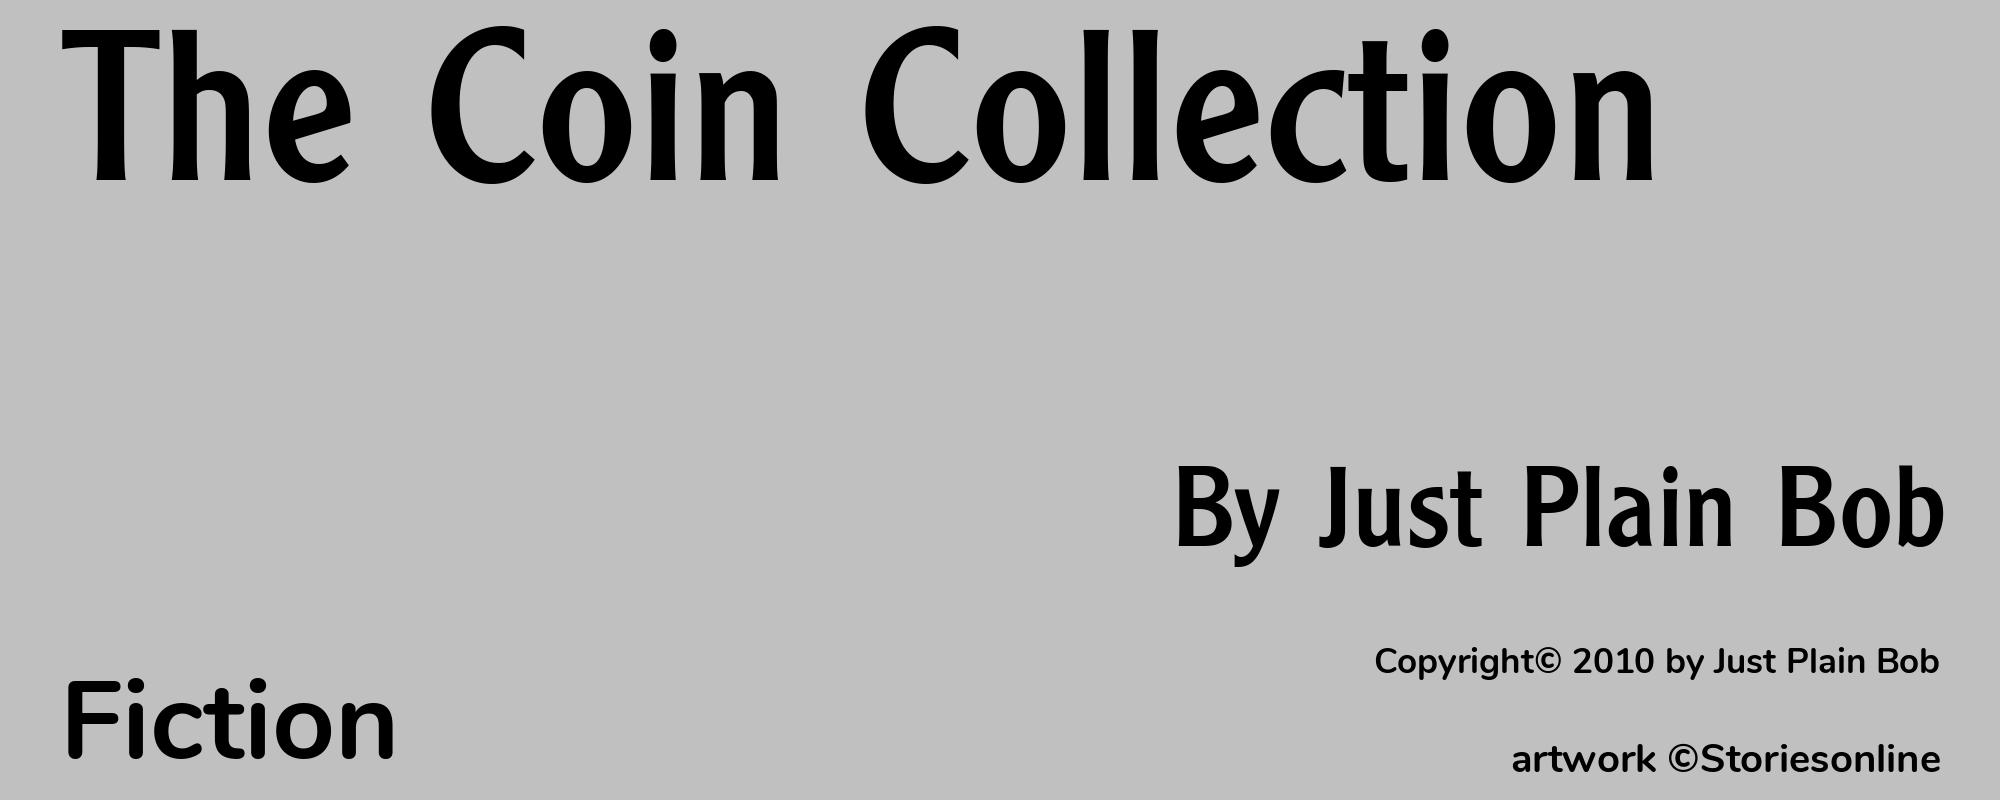 The Coin Collection - Cover